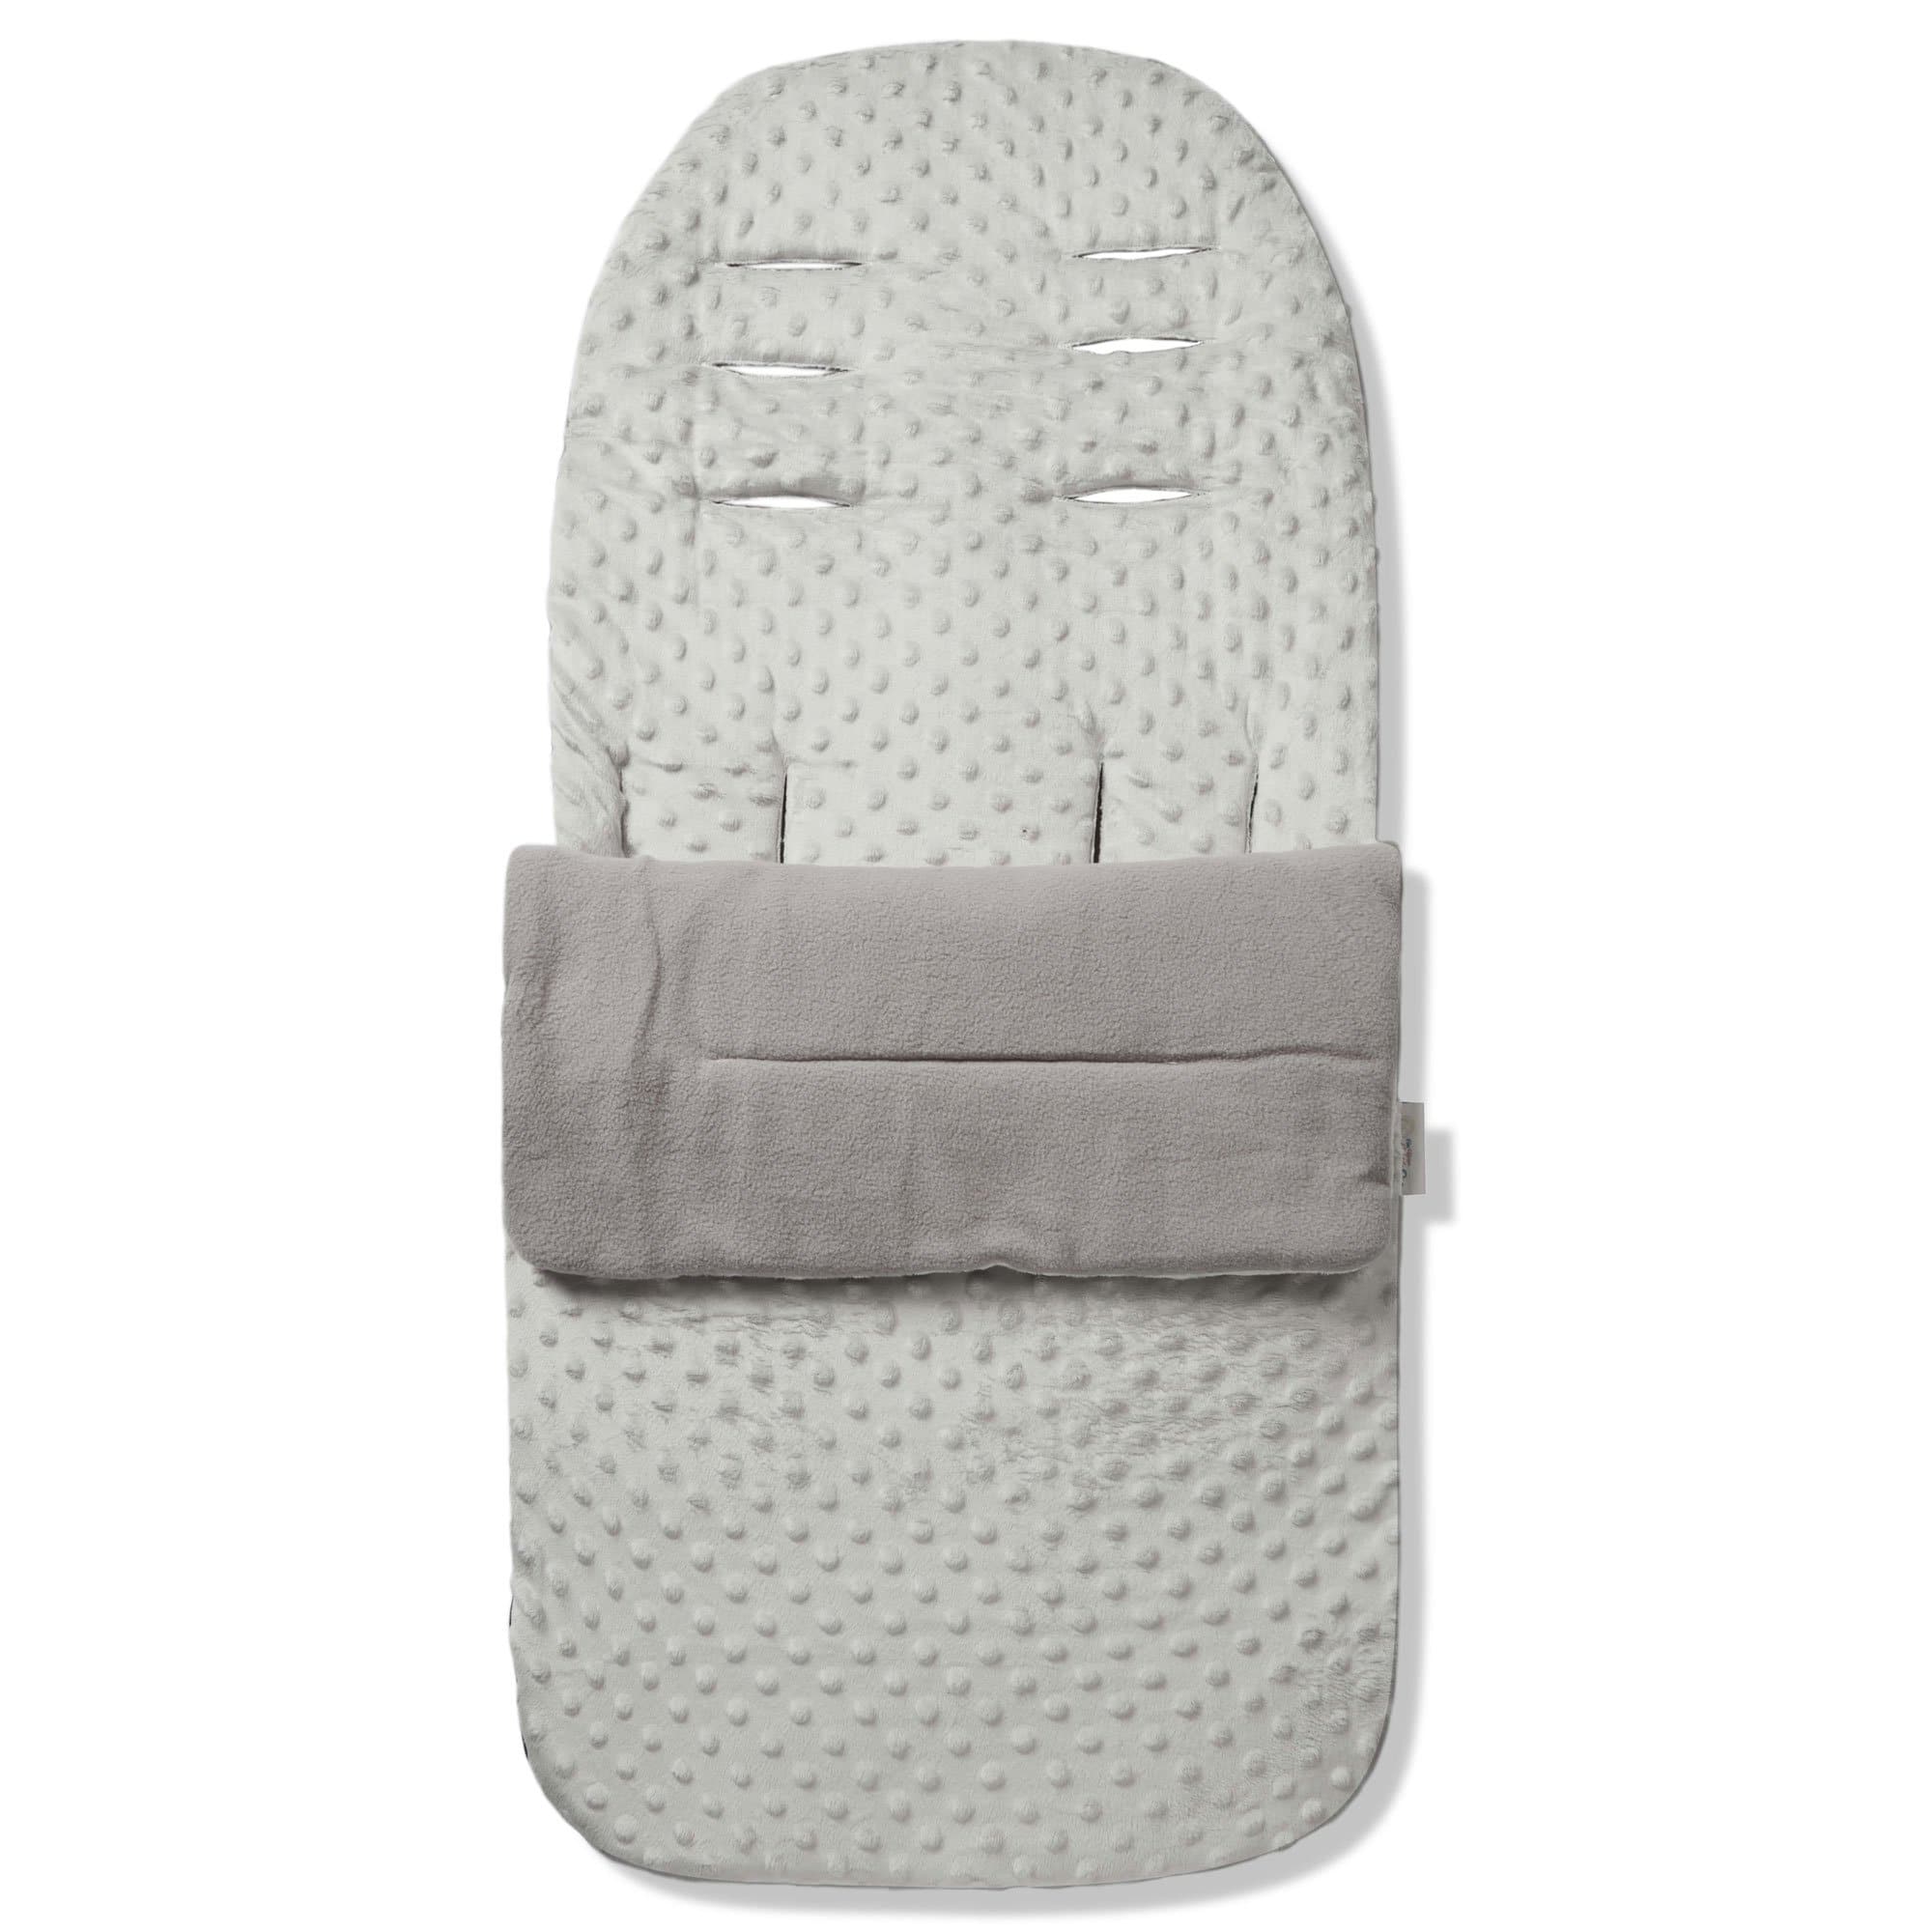 Dimple Footmuff / Cosy Toes Compatible with Bebe 9 - Grey / Fits All Models | For Your Little One